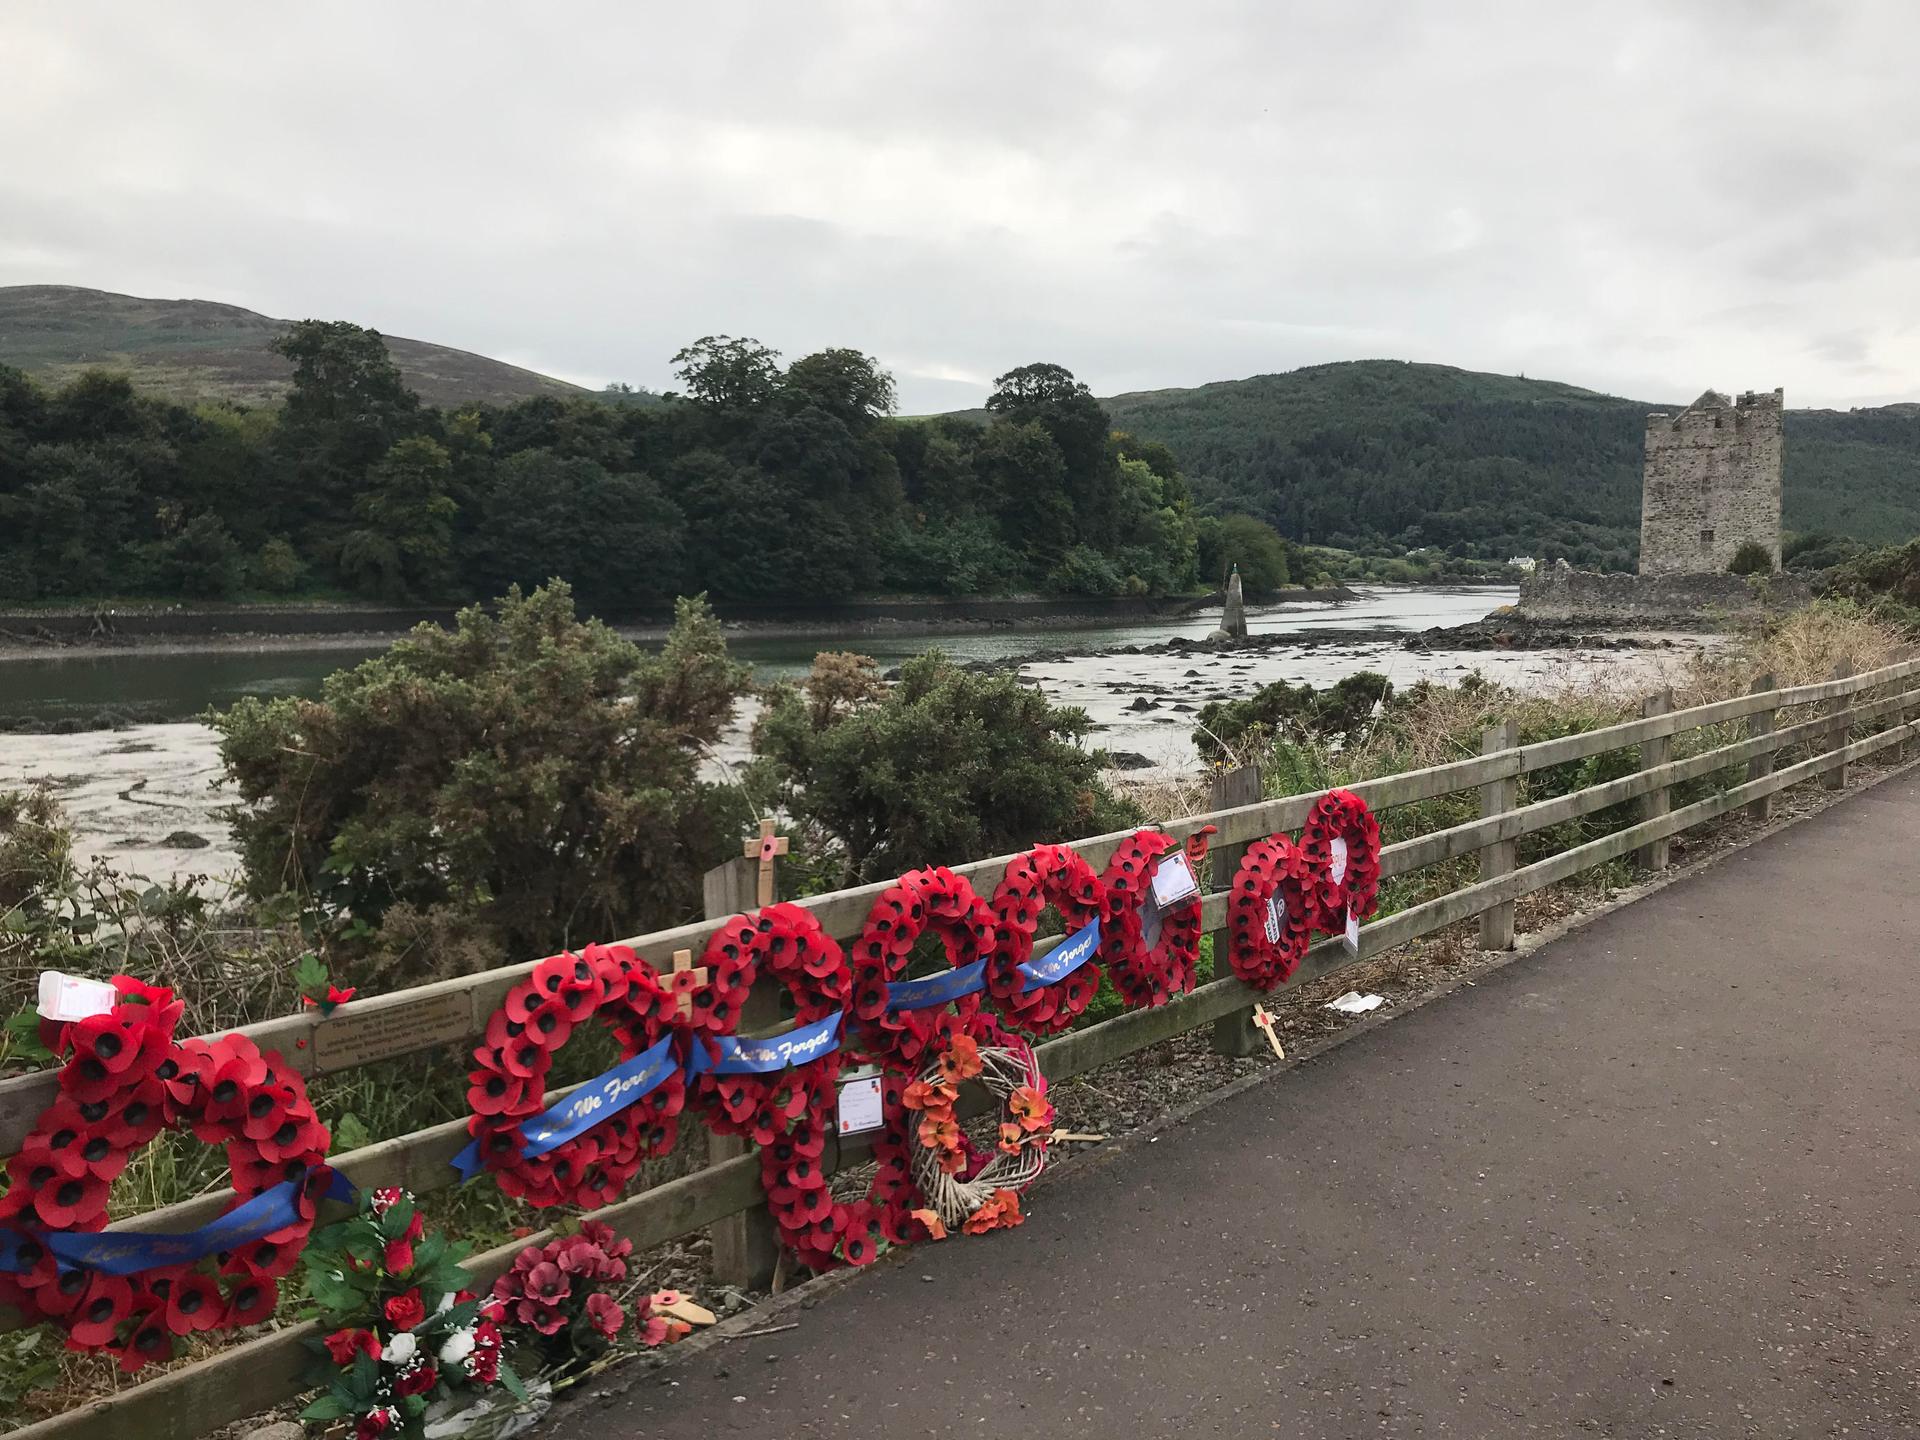 Wreaths left at the scene of the 1979 Provisional IRA bombing of a British Army convoy in Warrenpoint. 18 soliders and 1 civilian were killed